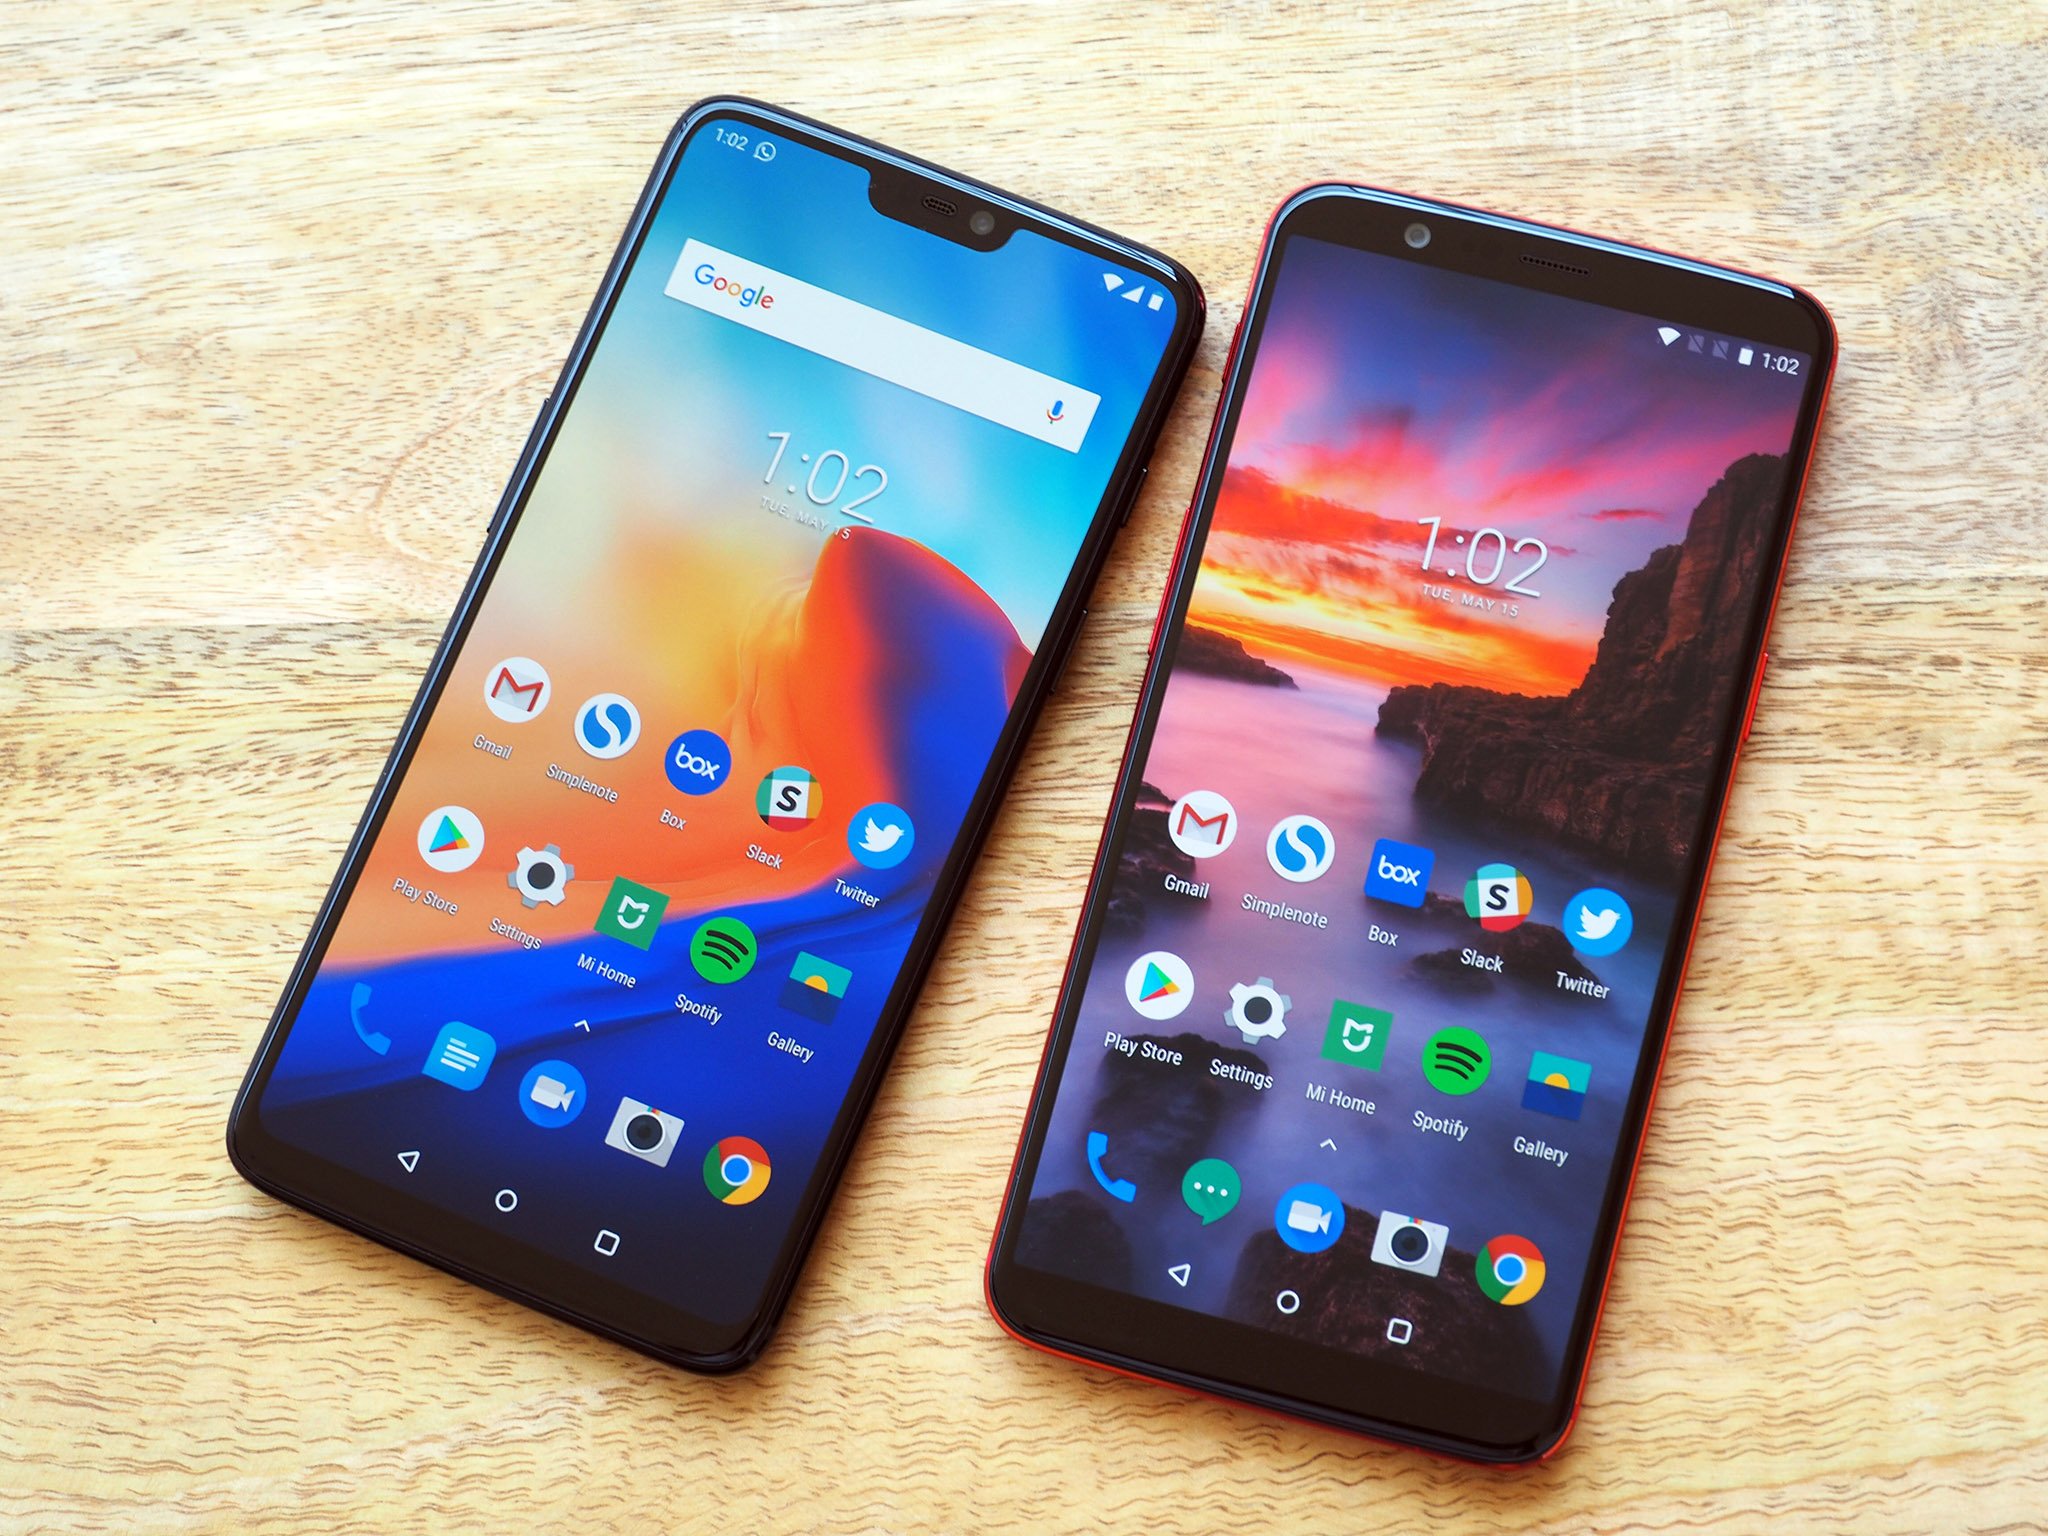 Oneplus 6 and oneplus 6t difference